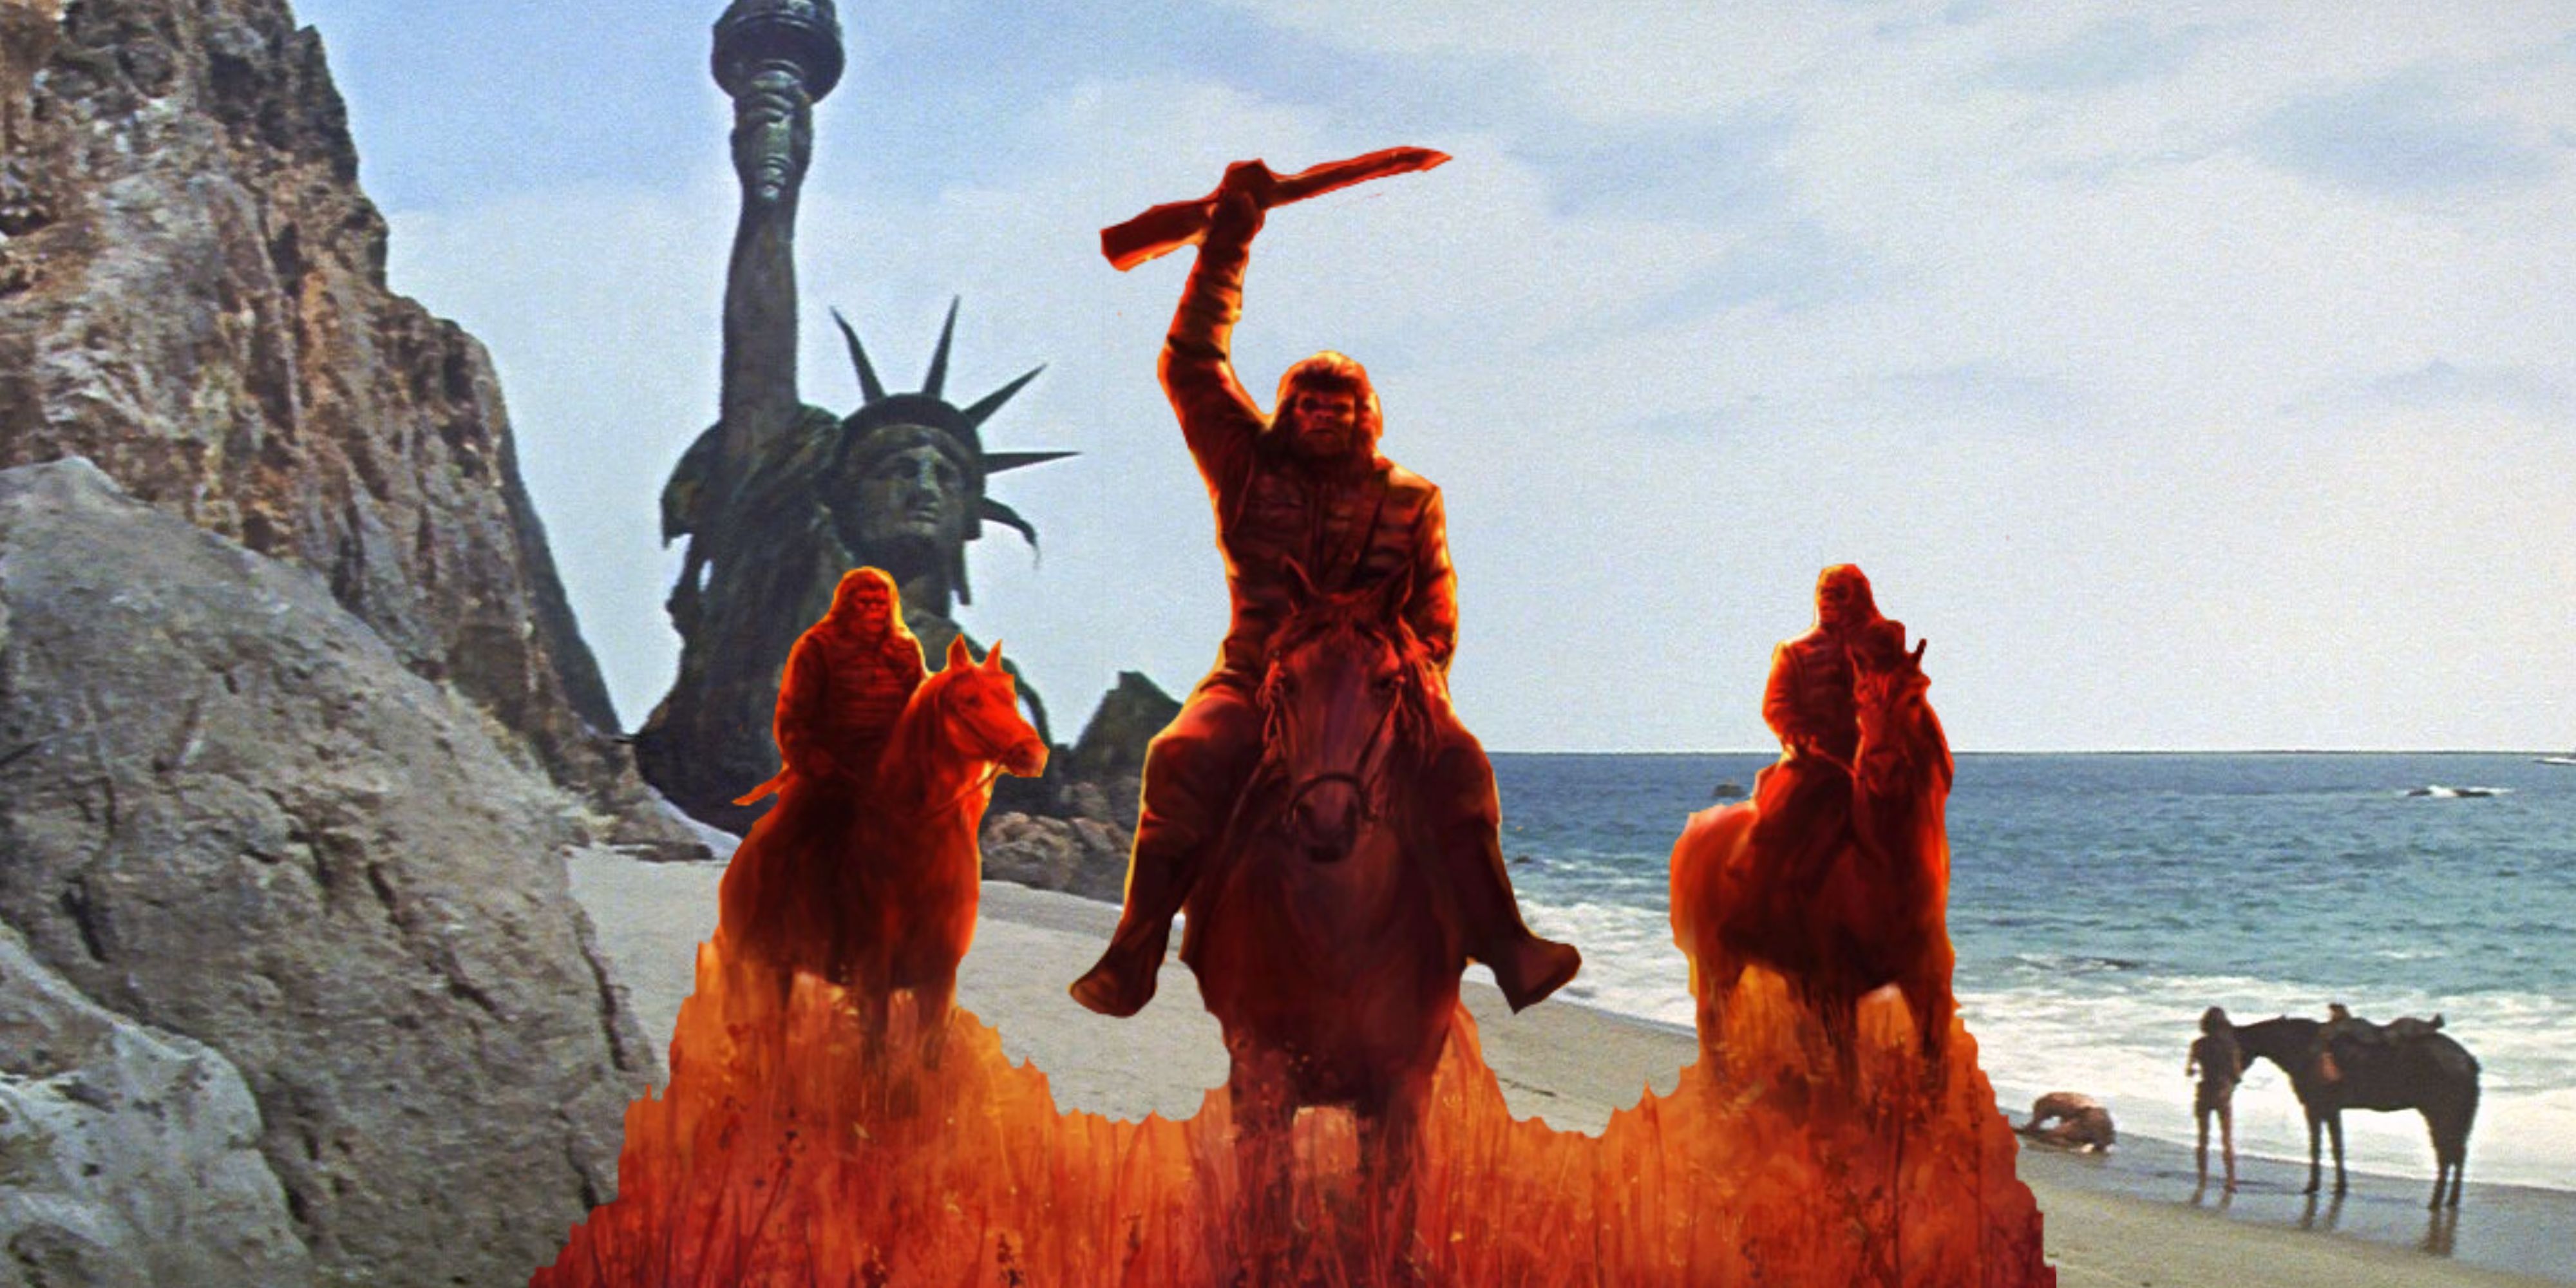 Planet of the Apes board game box in front of the Statue of Liberty ending